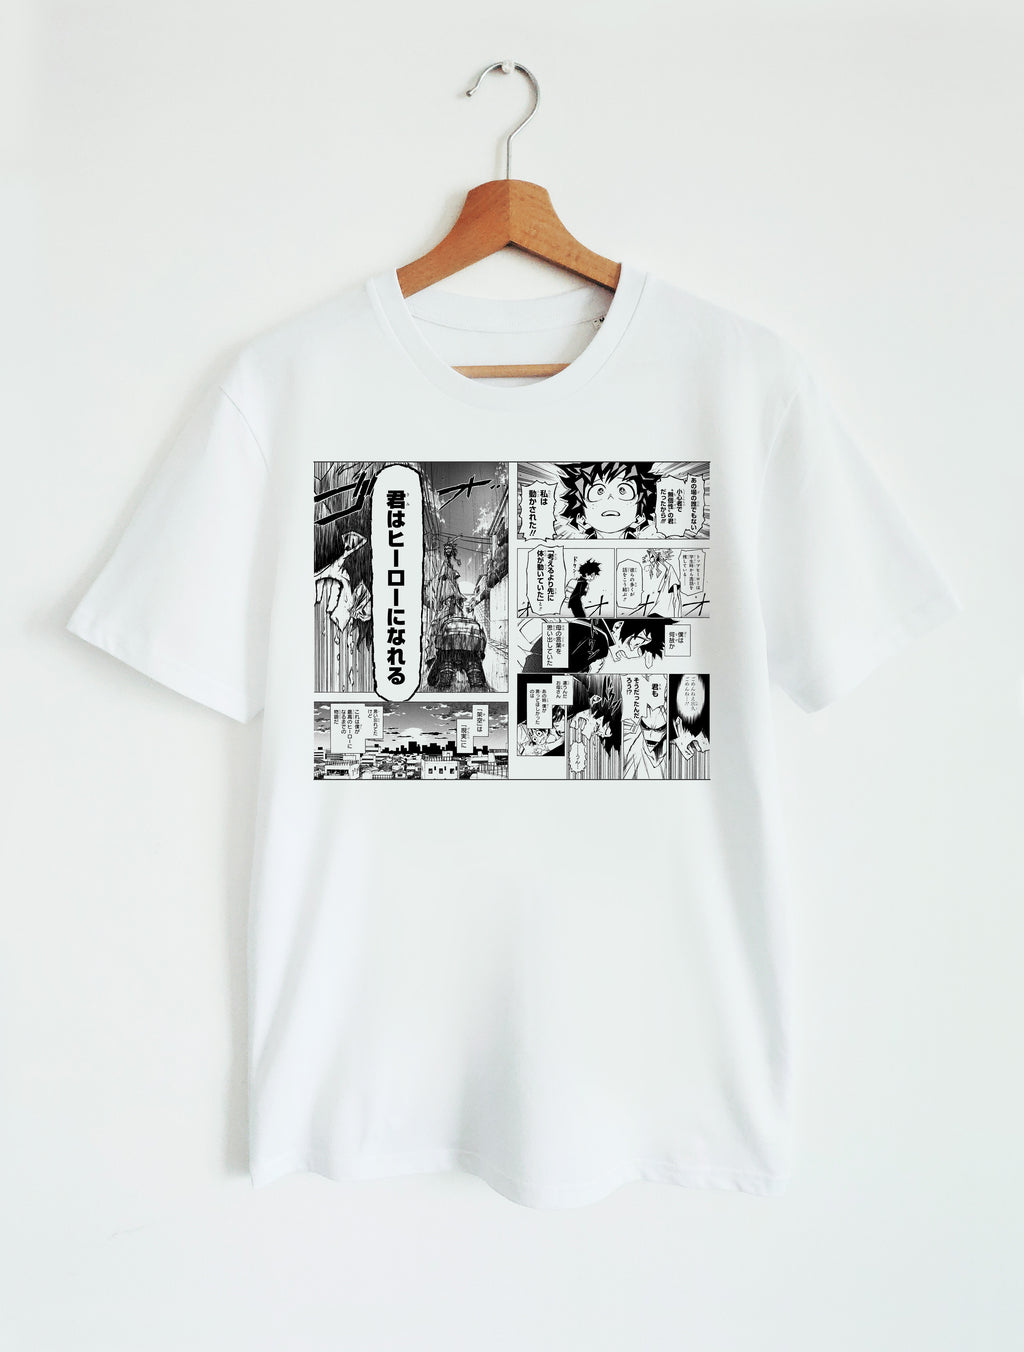 T-SHIRT WHITE UNISEX | MY HERO ACADEMIA - YOU CAN BECOME A HERO!